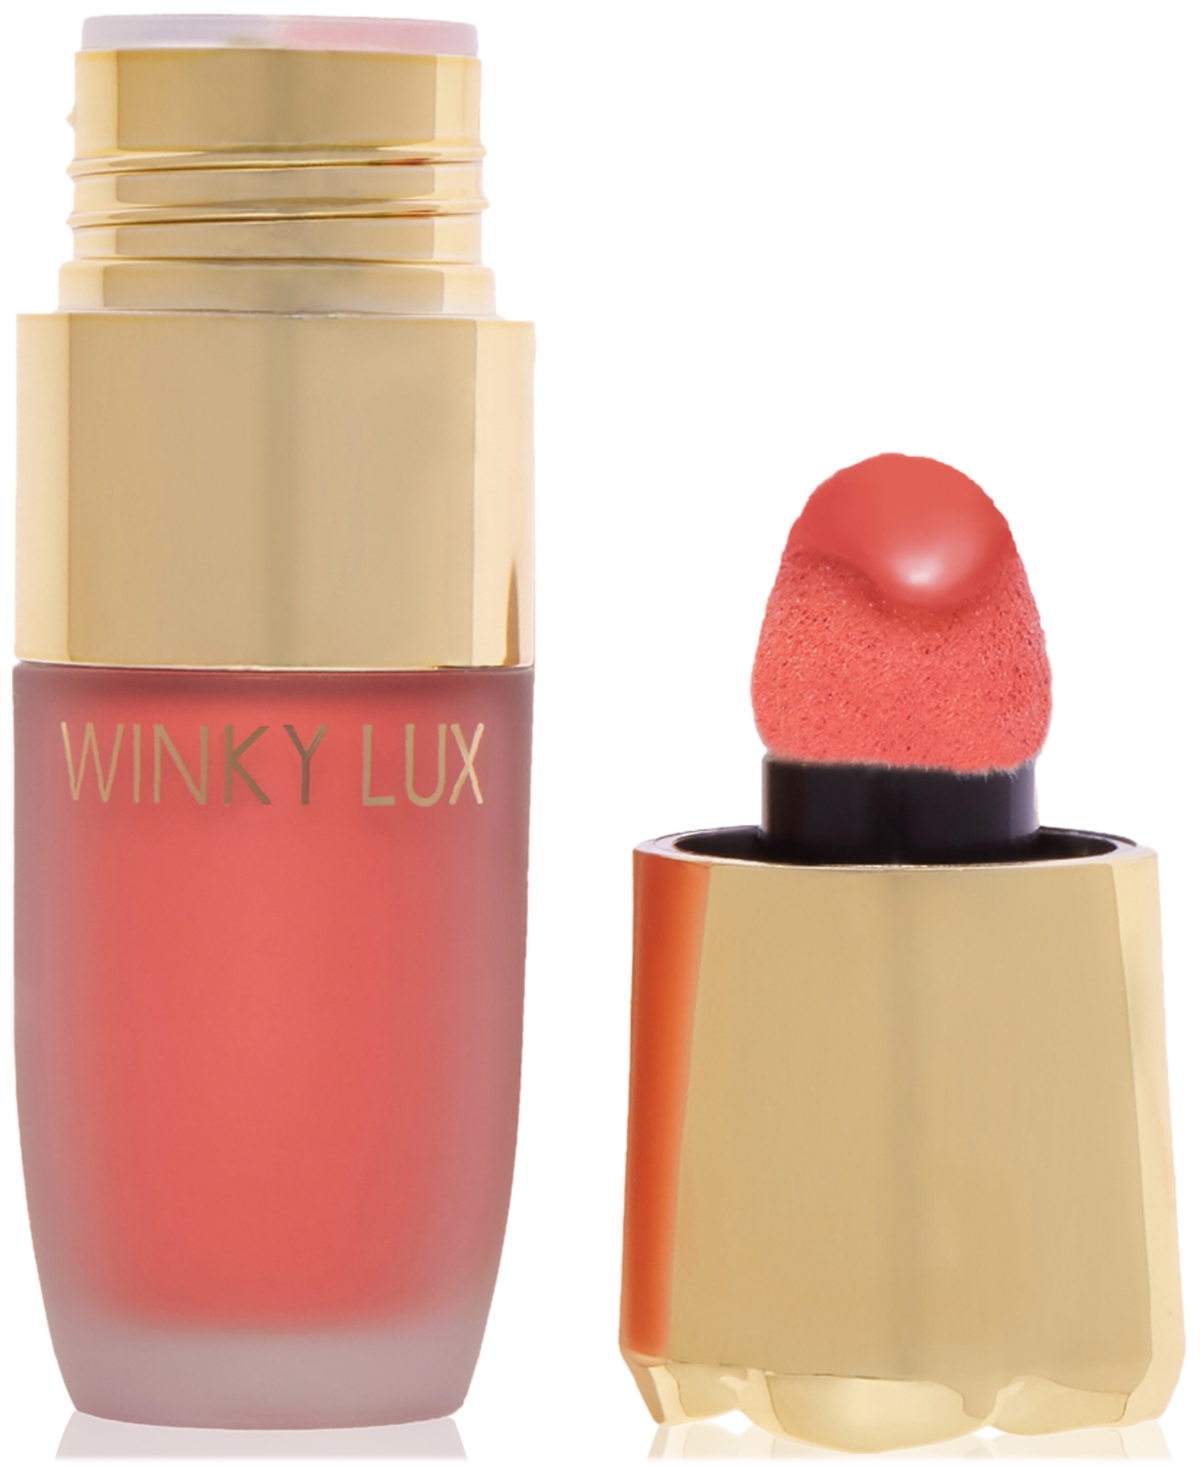 Winky Lux Cheeky Rose Liquid Blush In Darling